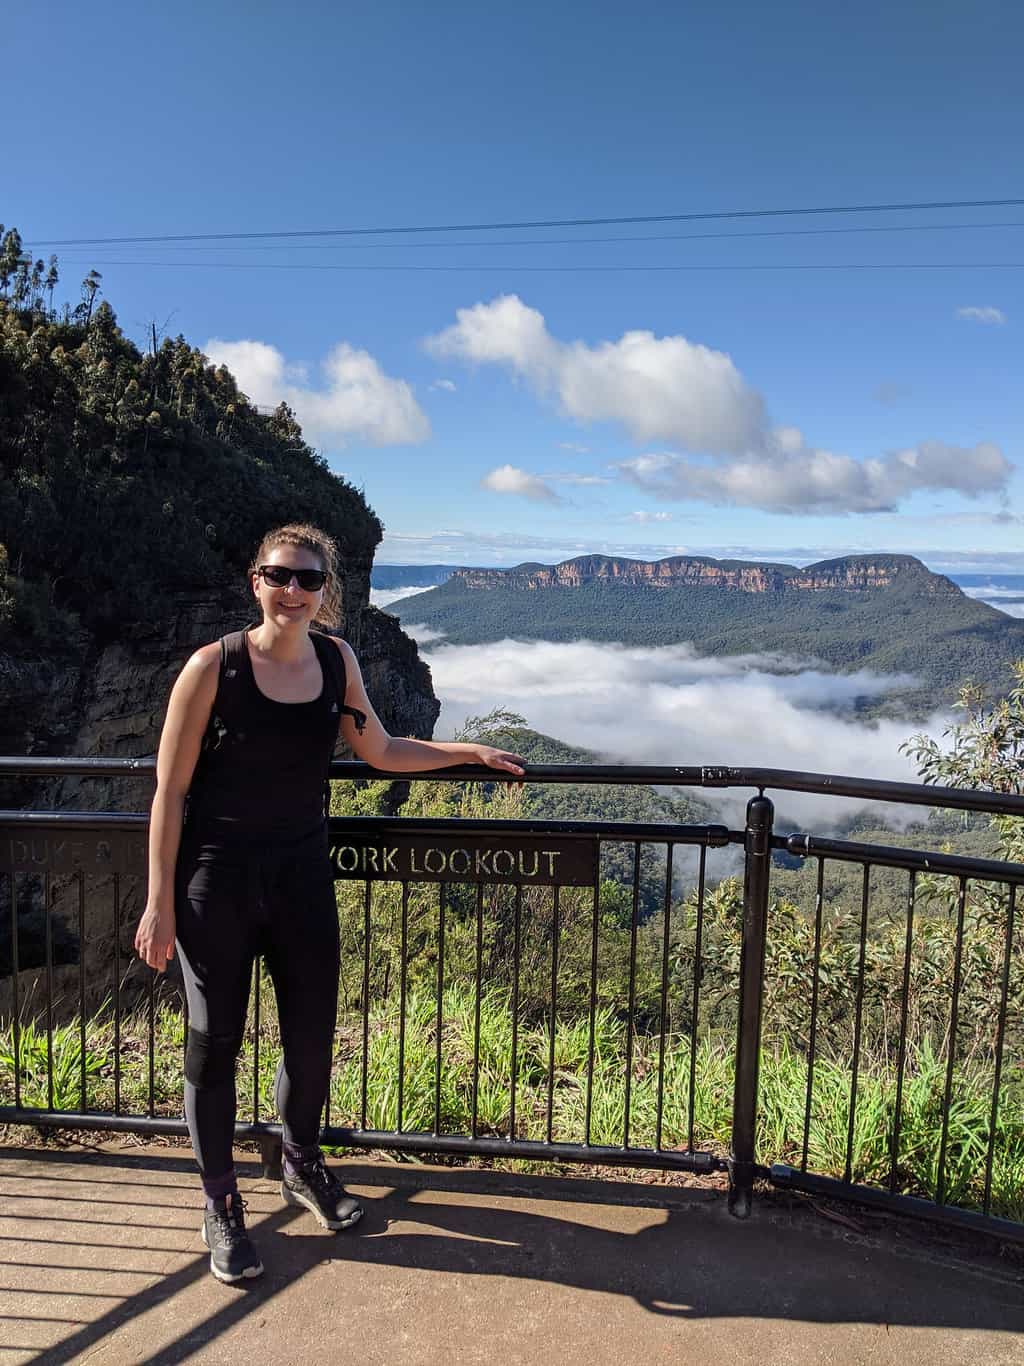 Standing above the clouds at the Furber Lookout viewpoint in the Blue Mountains National Park